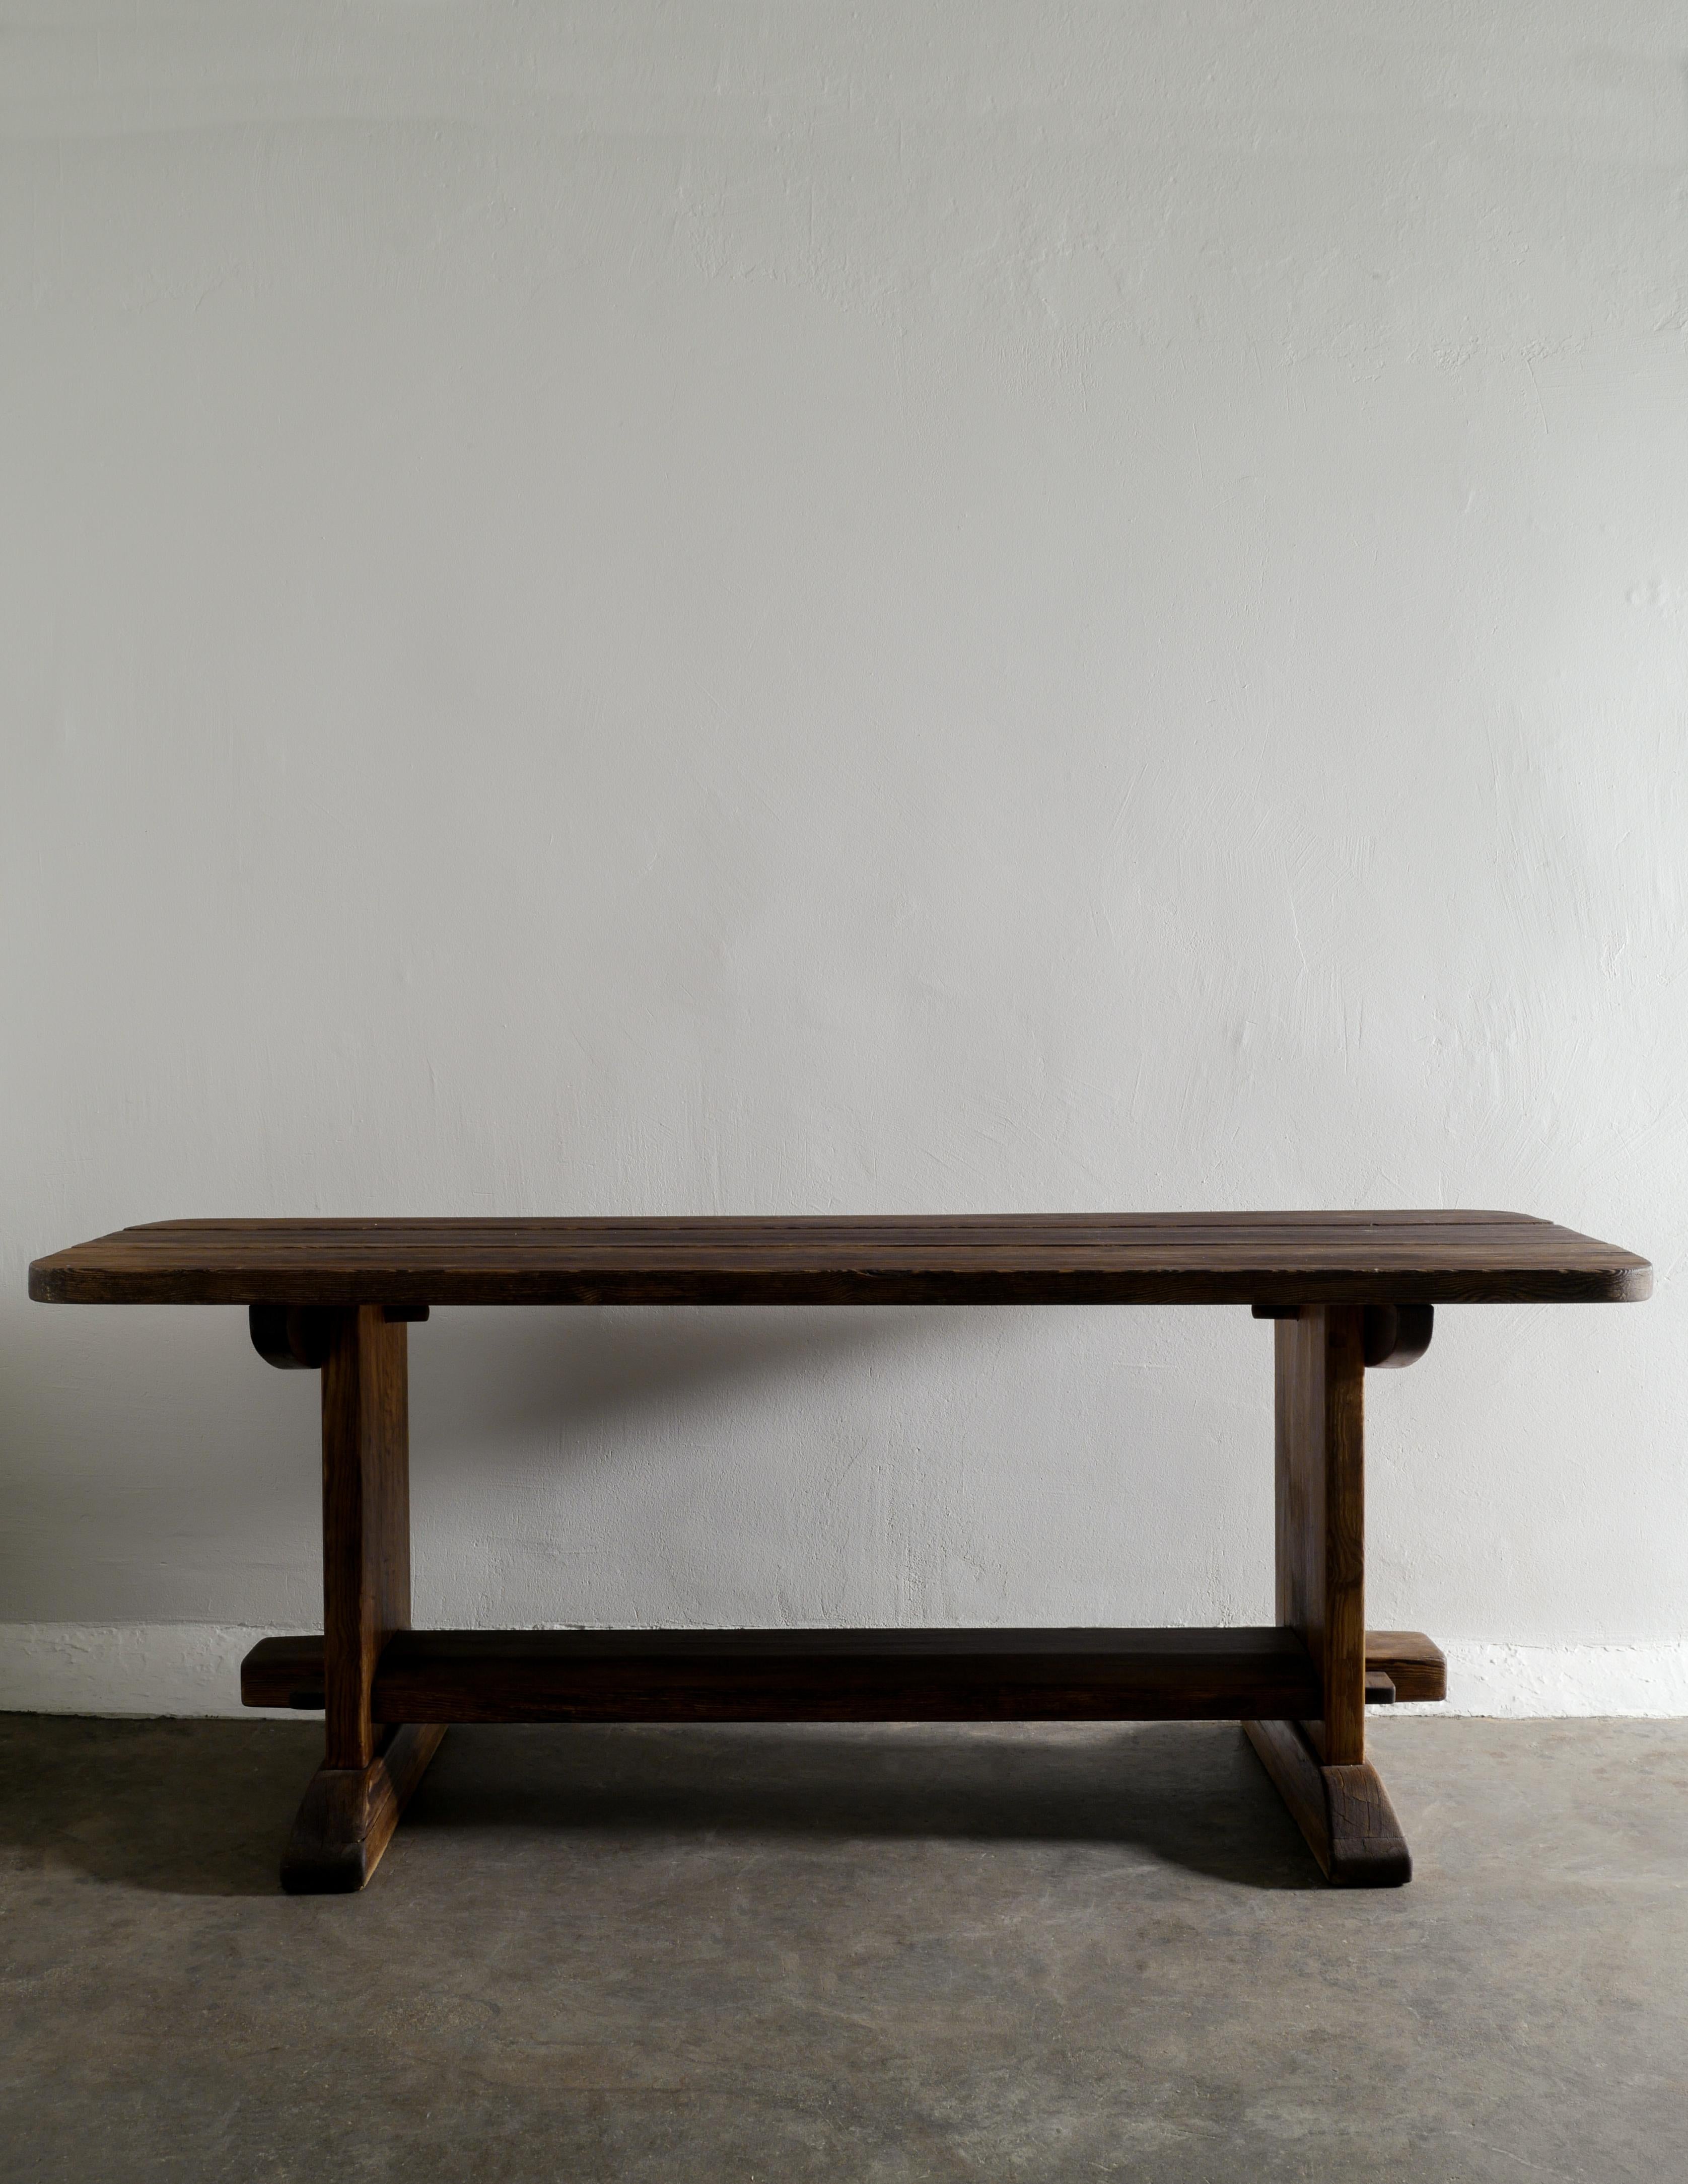 Very rare dining / console table in solid stained pine designed by Axel Einar Hjorth and produced by Nordiska Kompaniet in Stockholm 1932. In good vintage and original condition with patina from age and use. Perfect as a smaller dining table in or